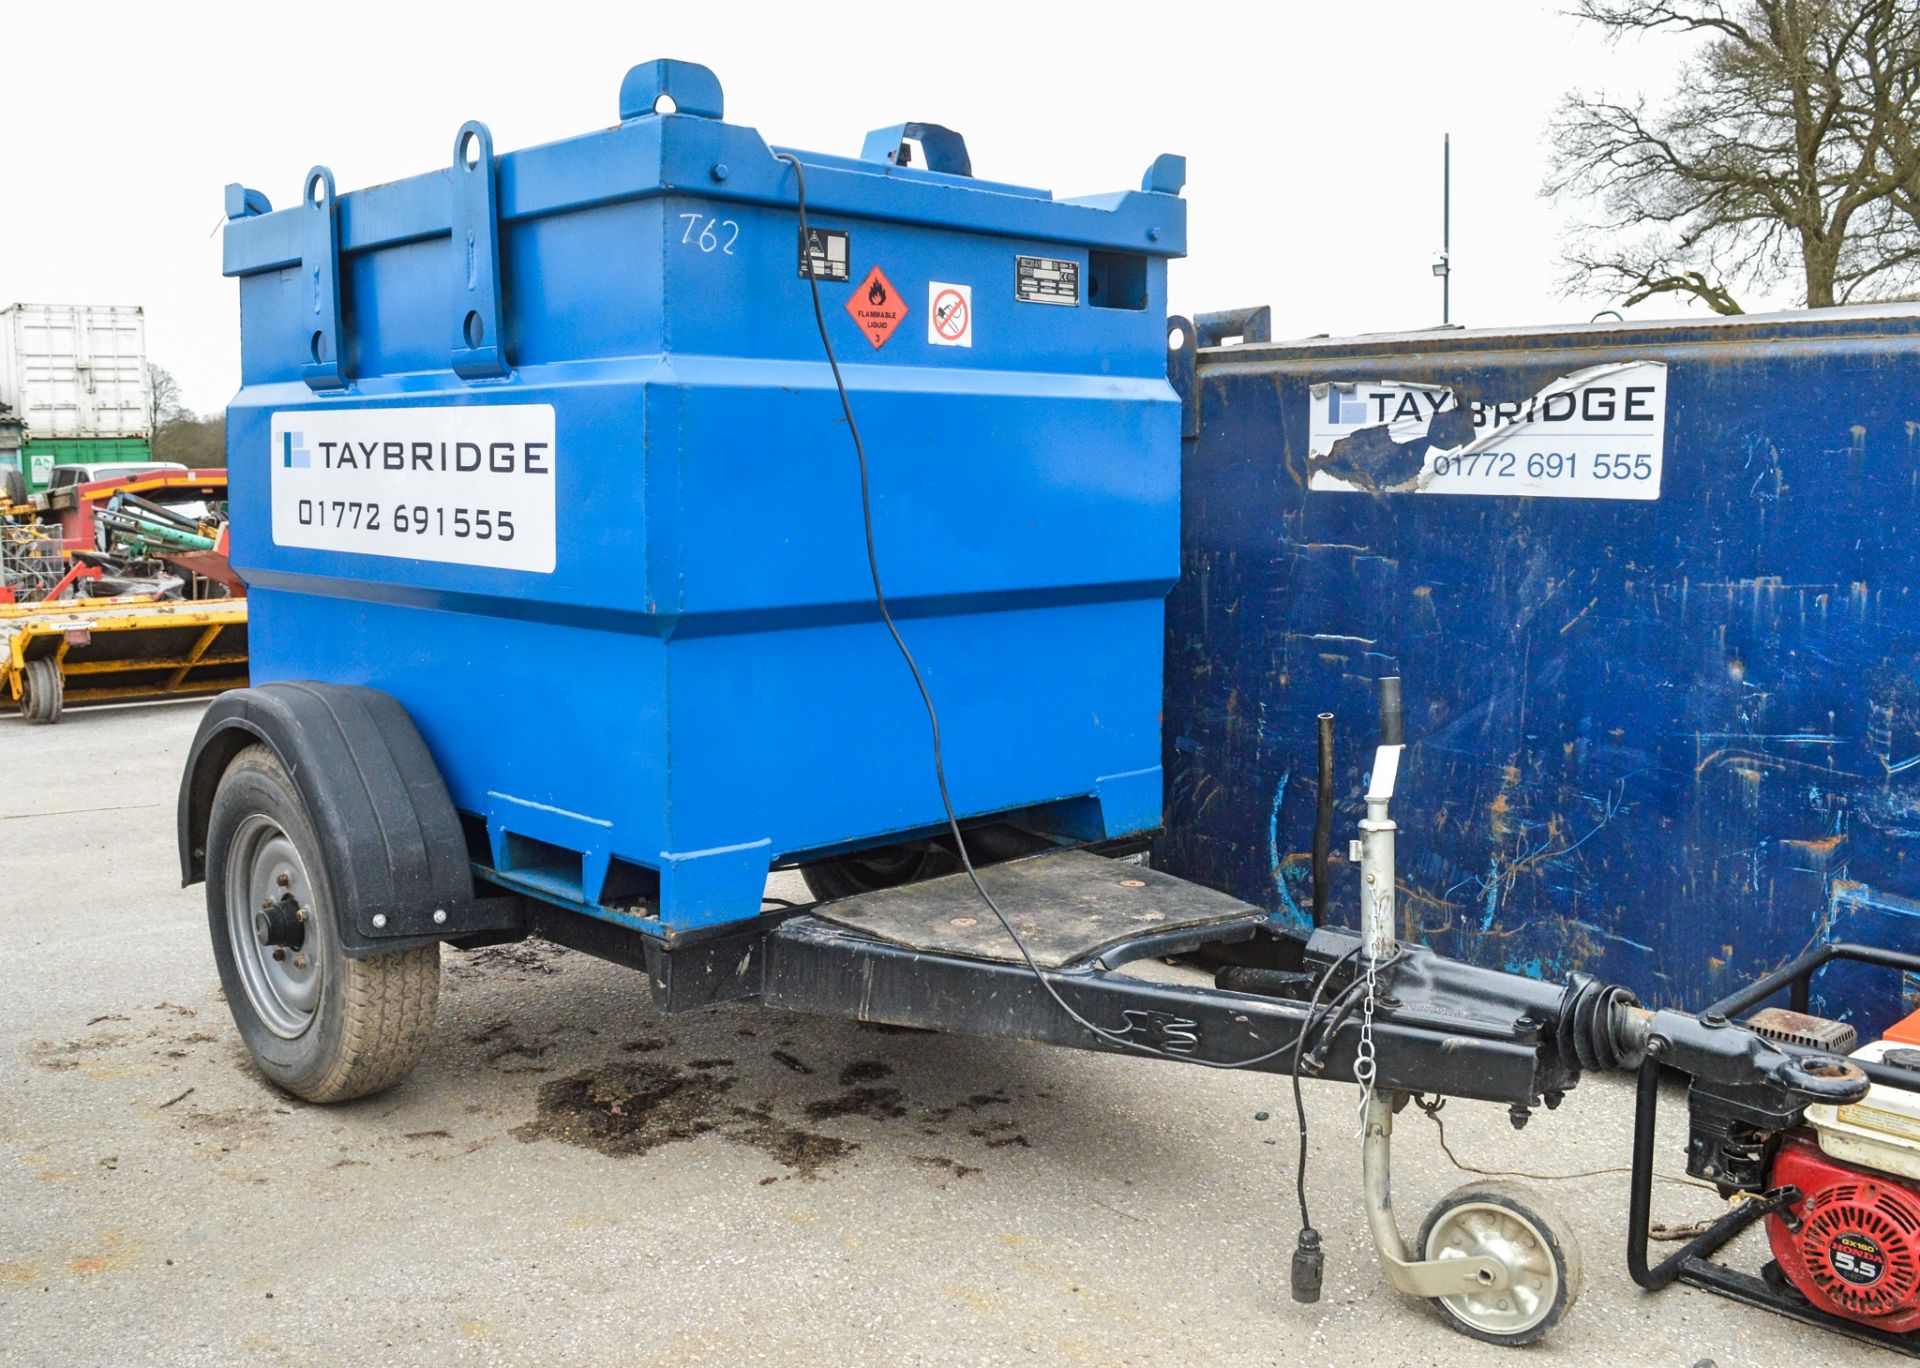 Western Trans Cube 950 litre fast tow bunded fuel bowser c/w hand pump, delivery hose & nozzle